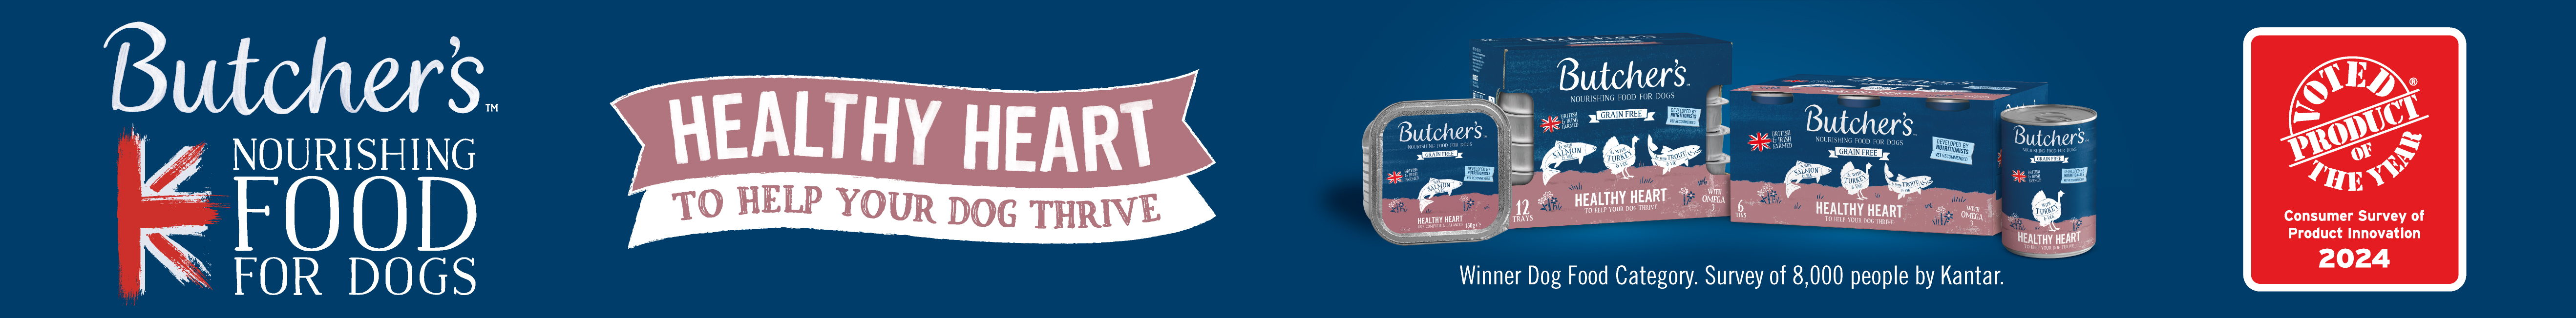 Butcher’s Nourishing Food for Dogs banner